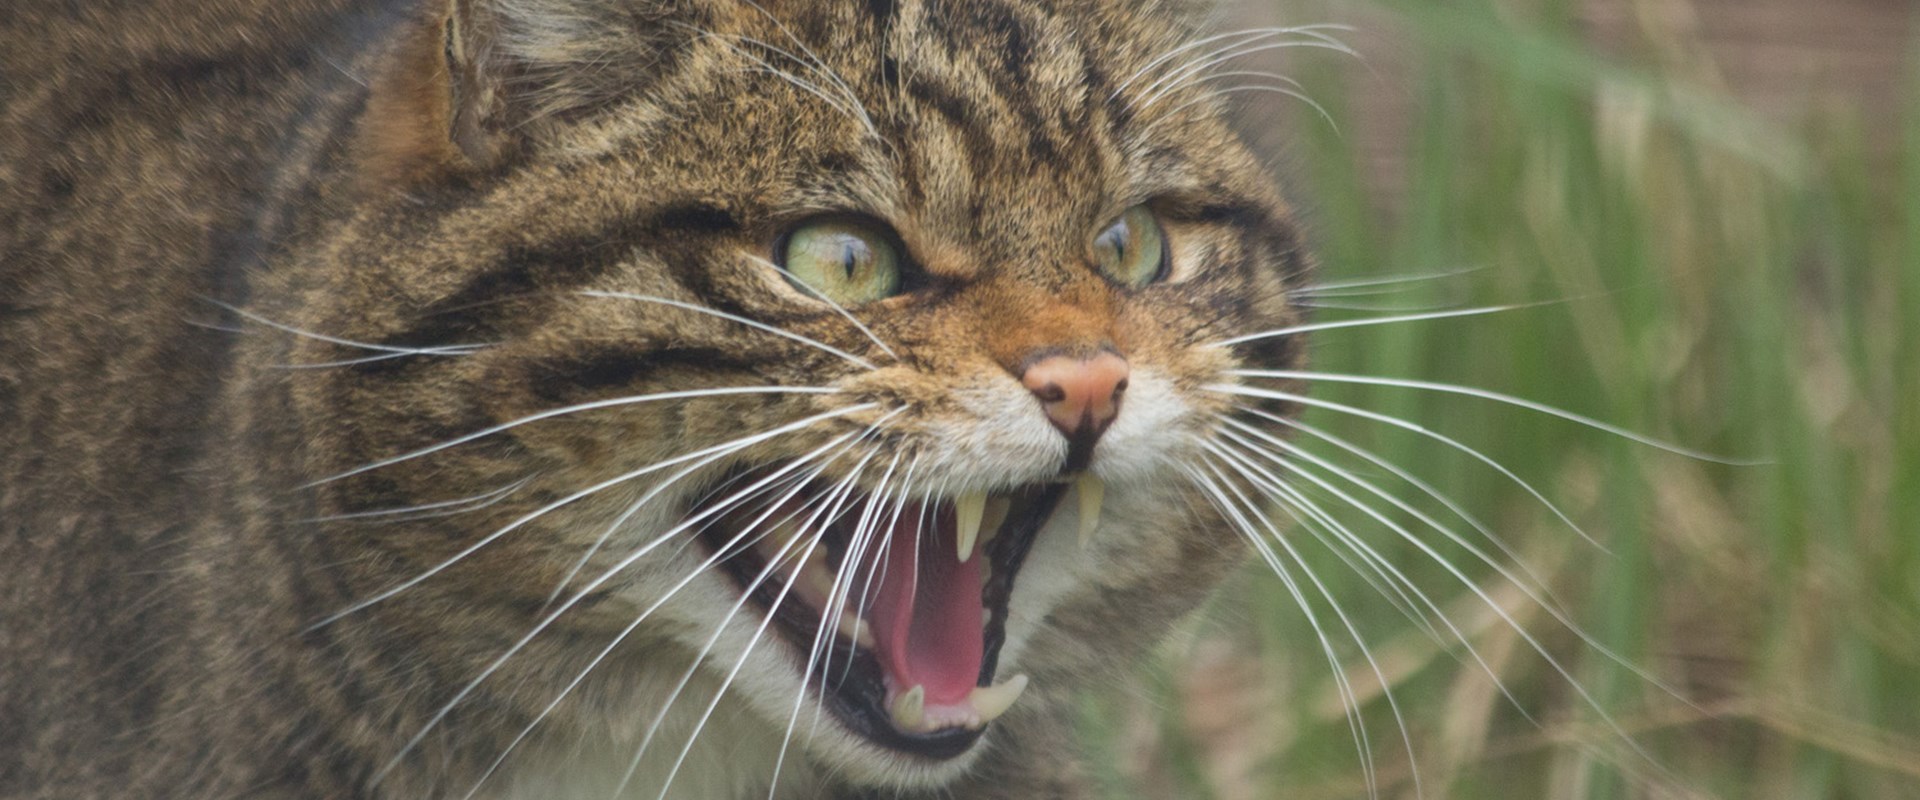 Front half of a Scottish wildcat snarling at something in a grassy area.